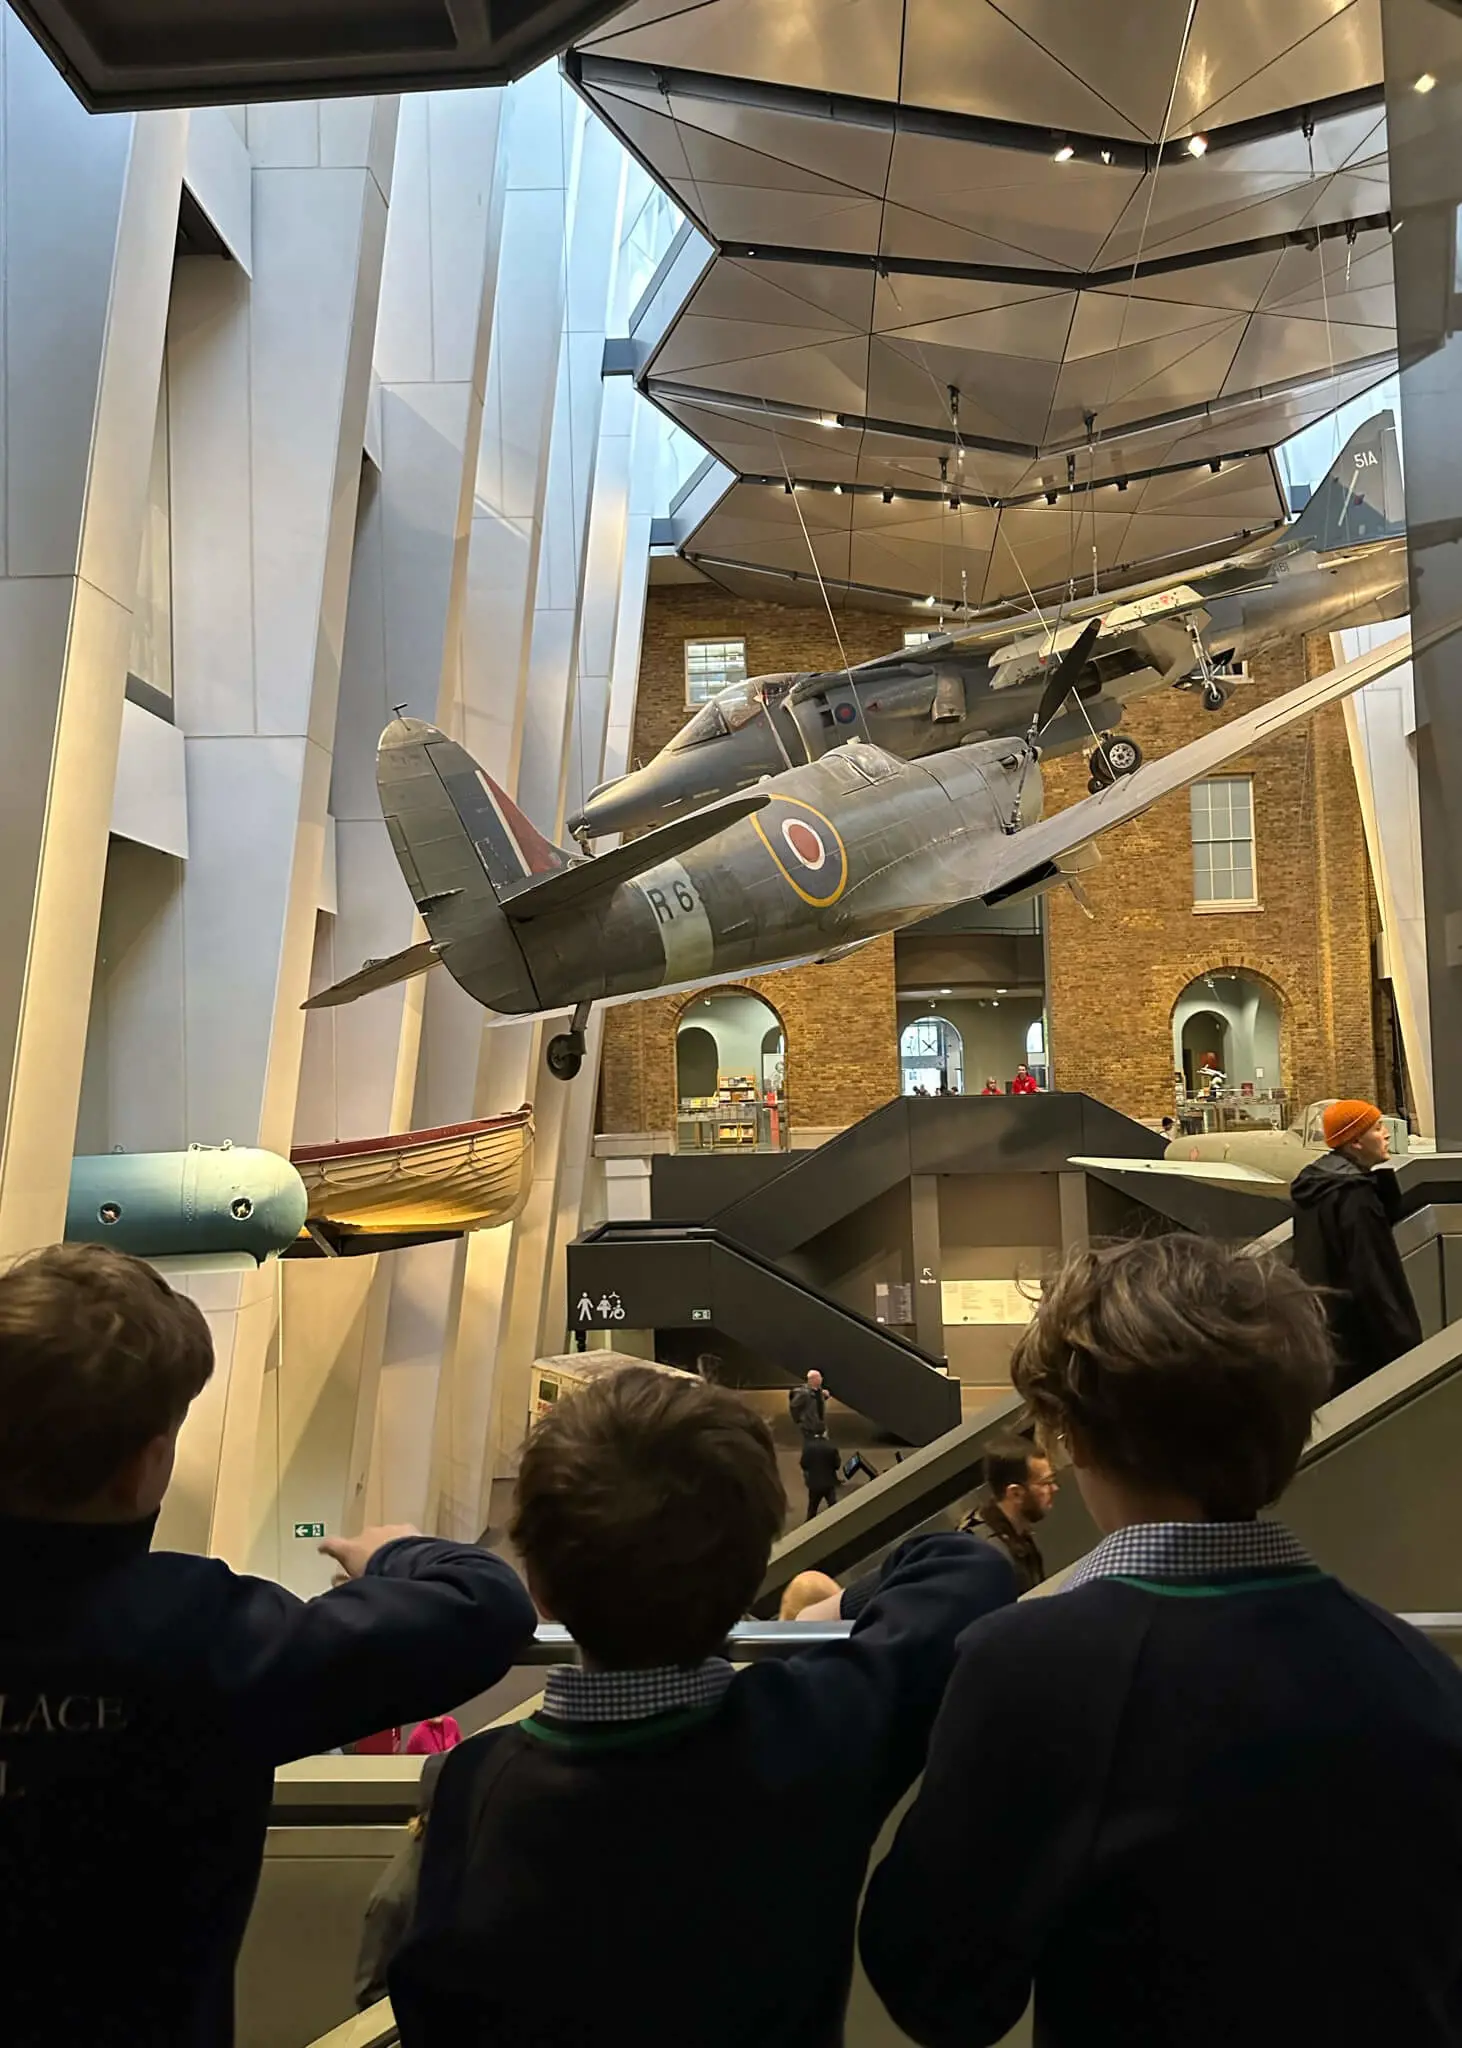 Last week Prep 6 pupils had an insightful visit to the Imperial War Museum